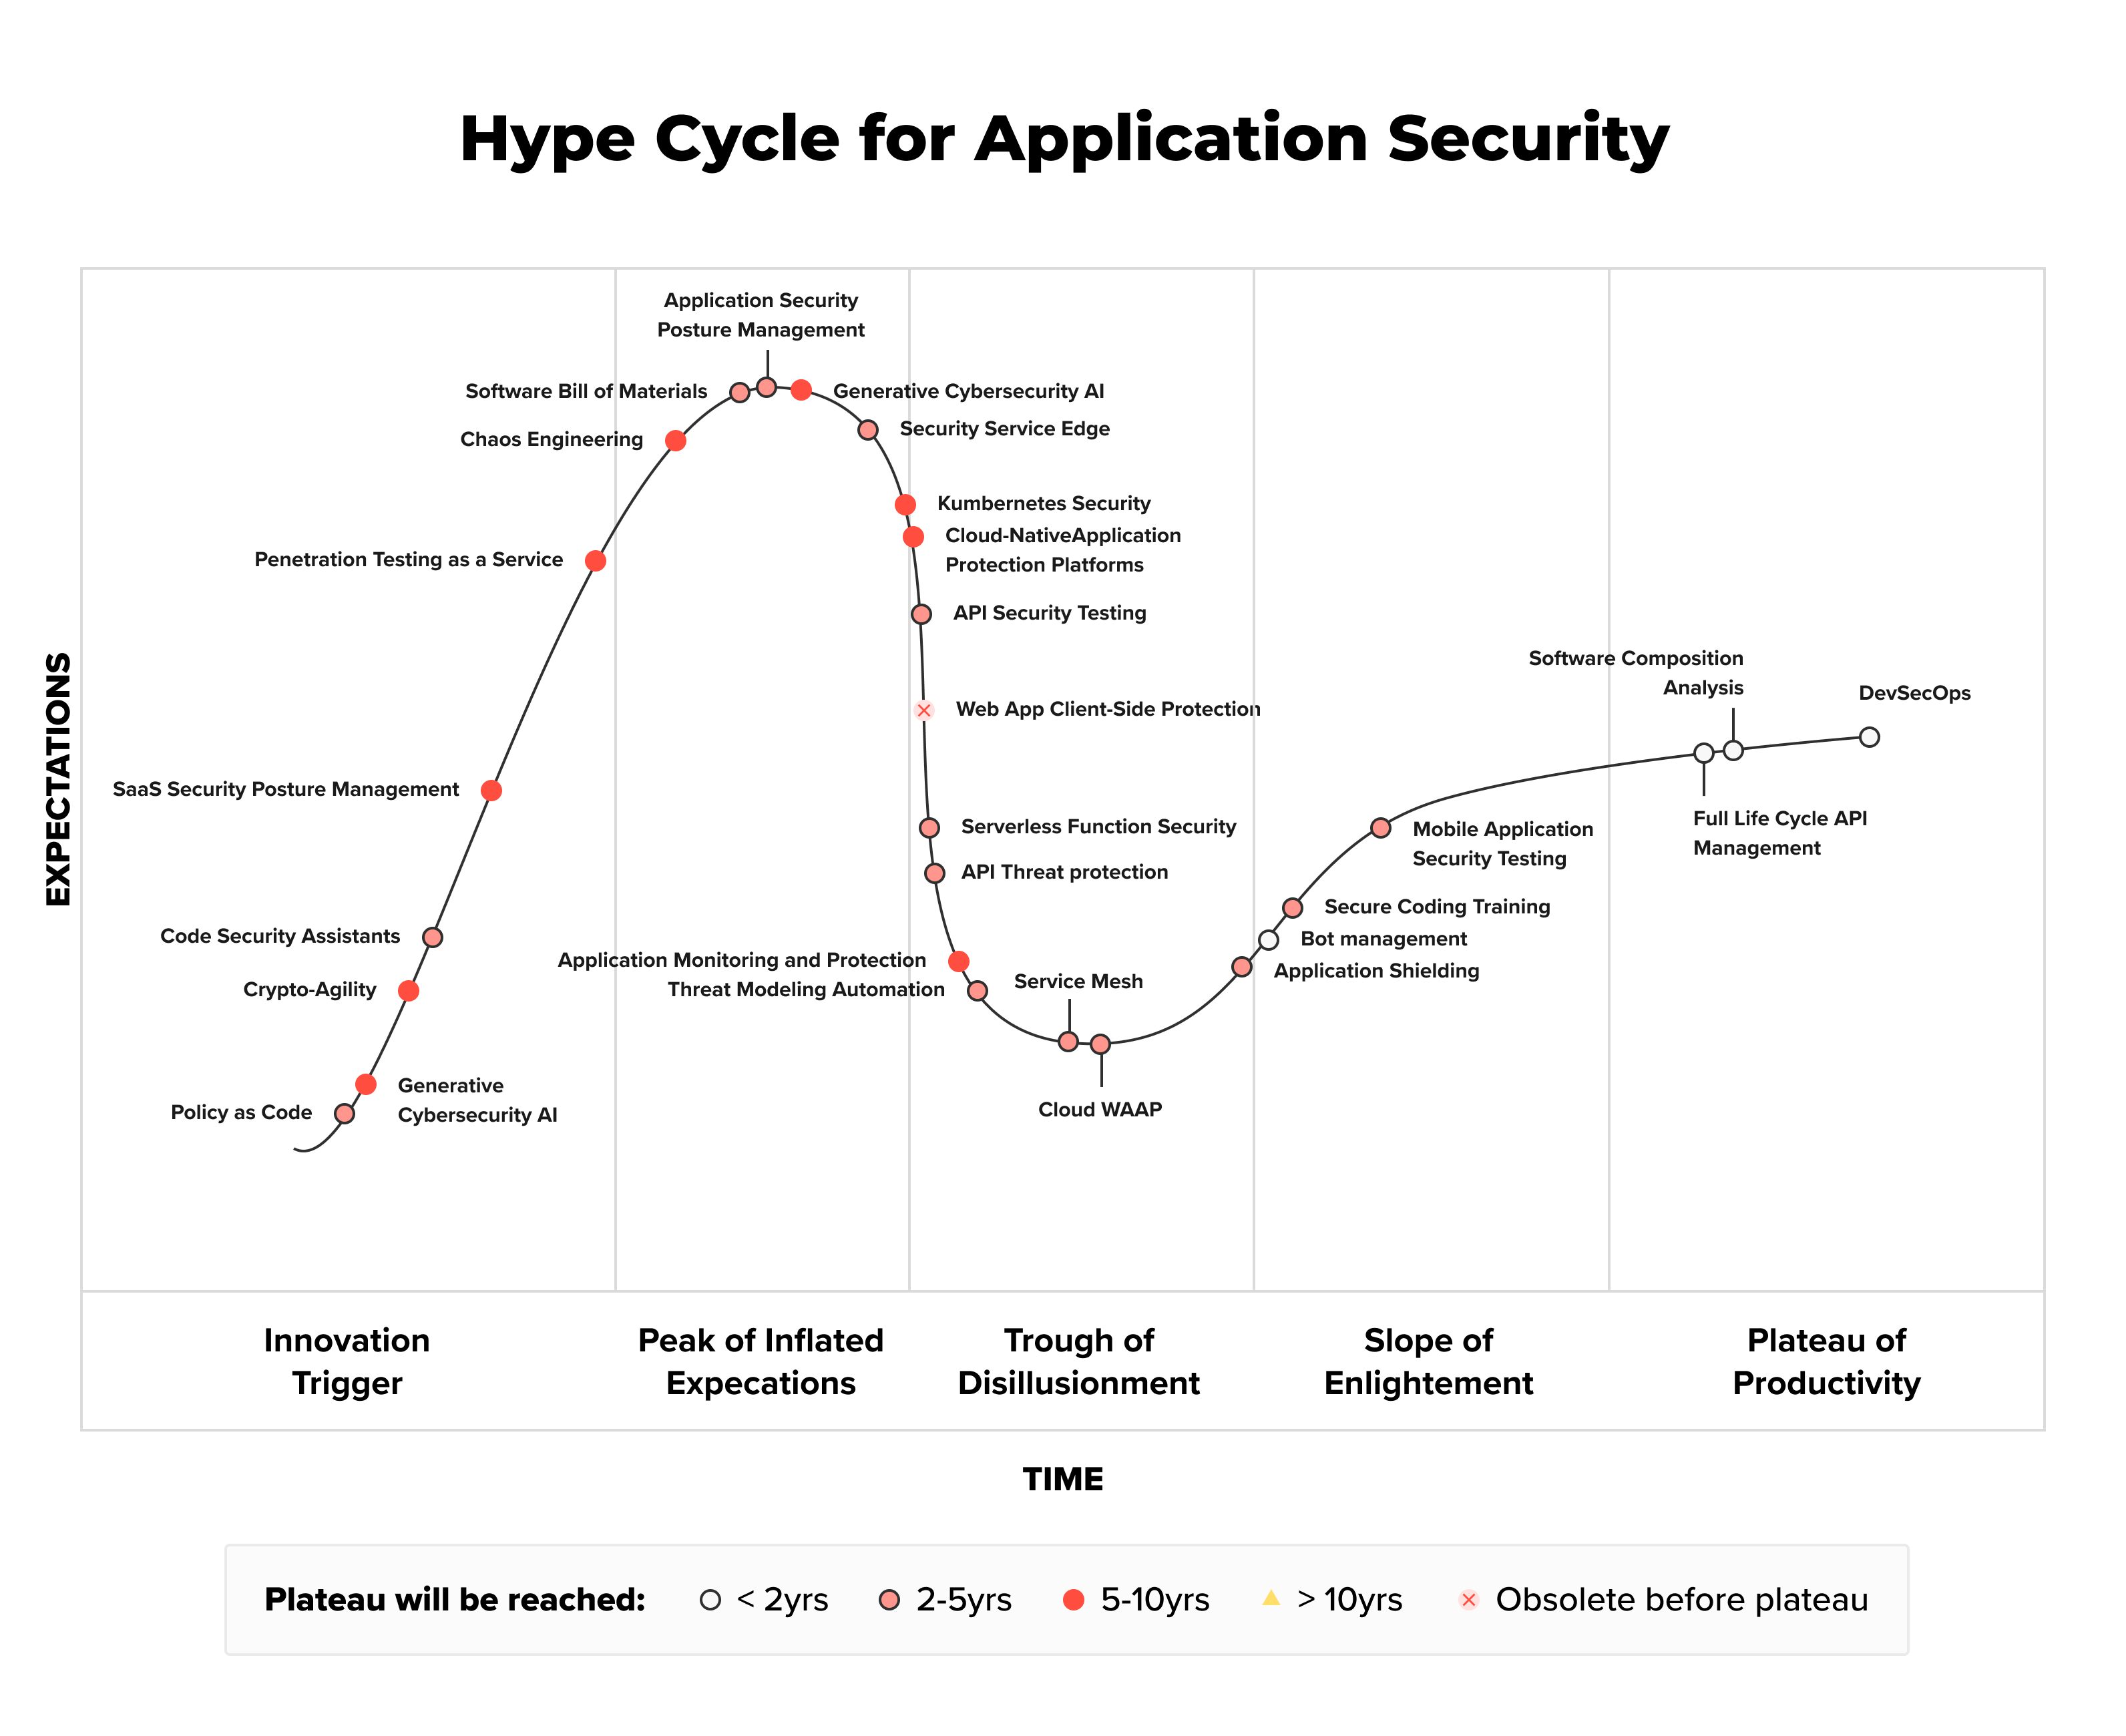 Gartner Hype Cycle for Application Security